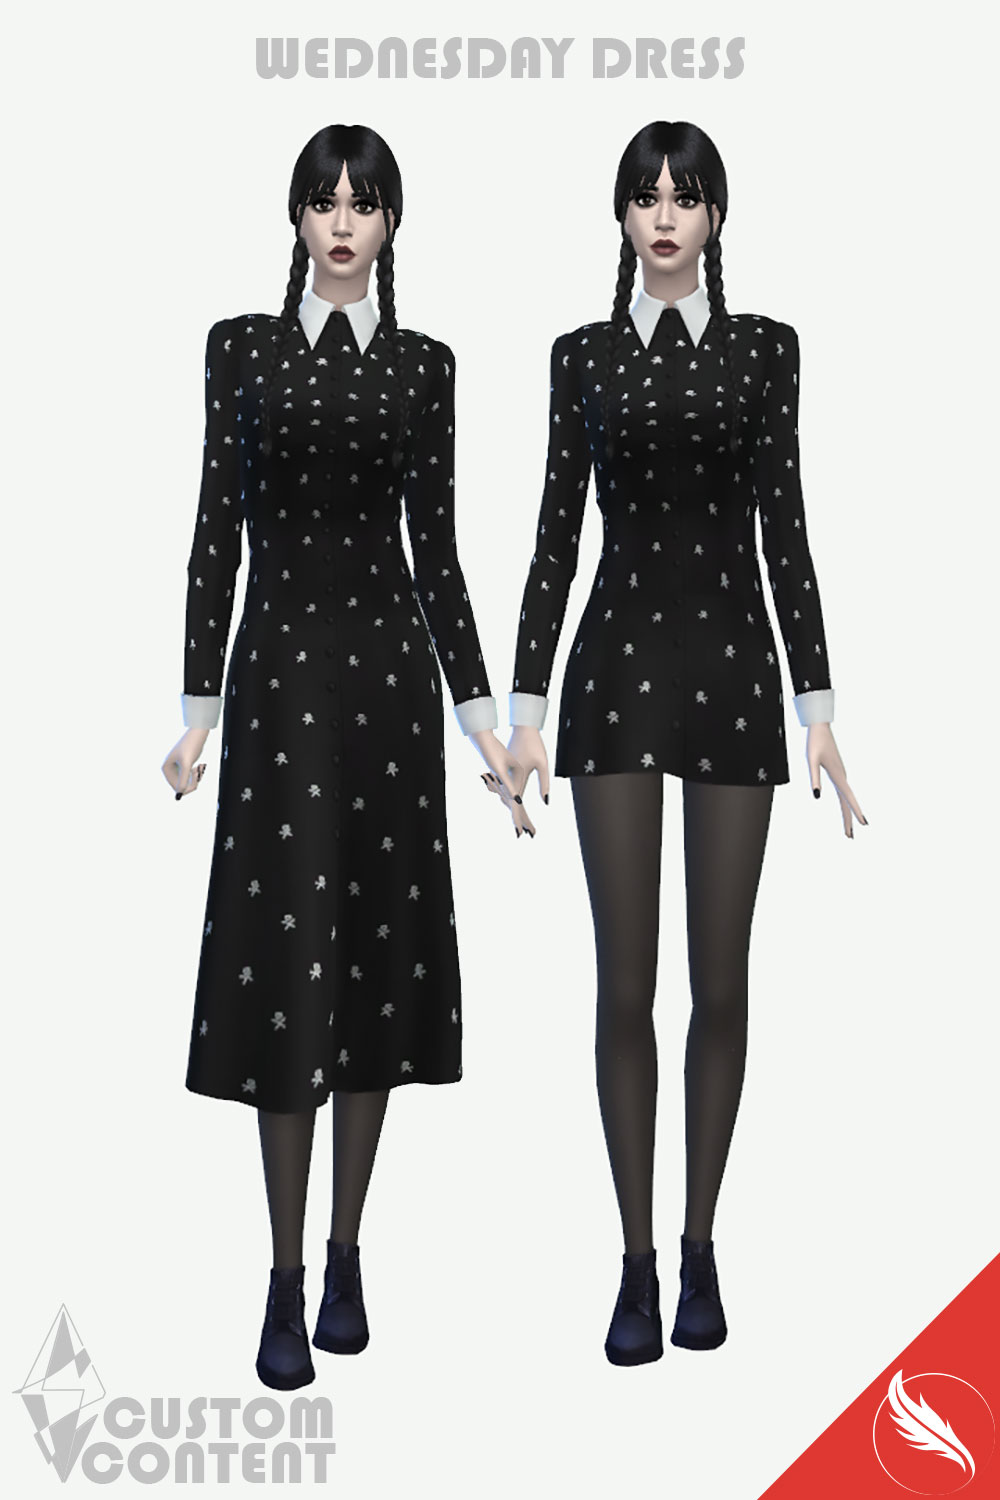 The Sims 4 Wednesday Dress